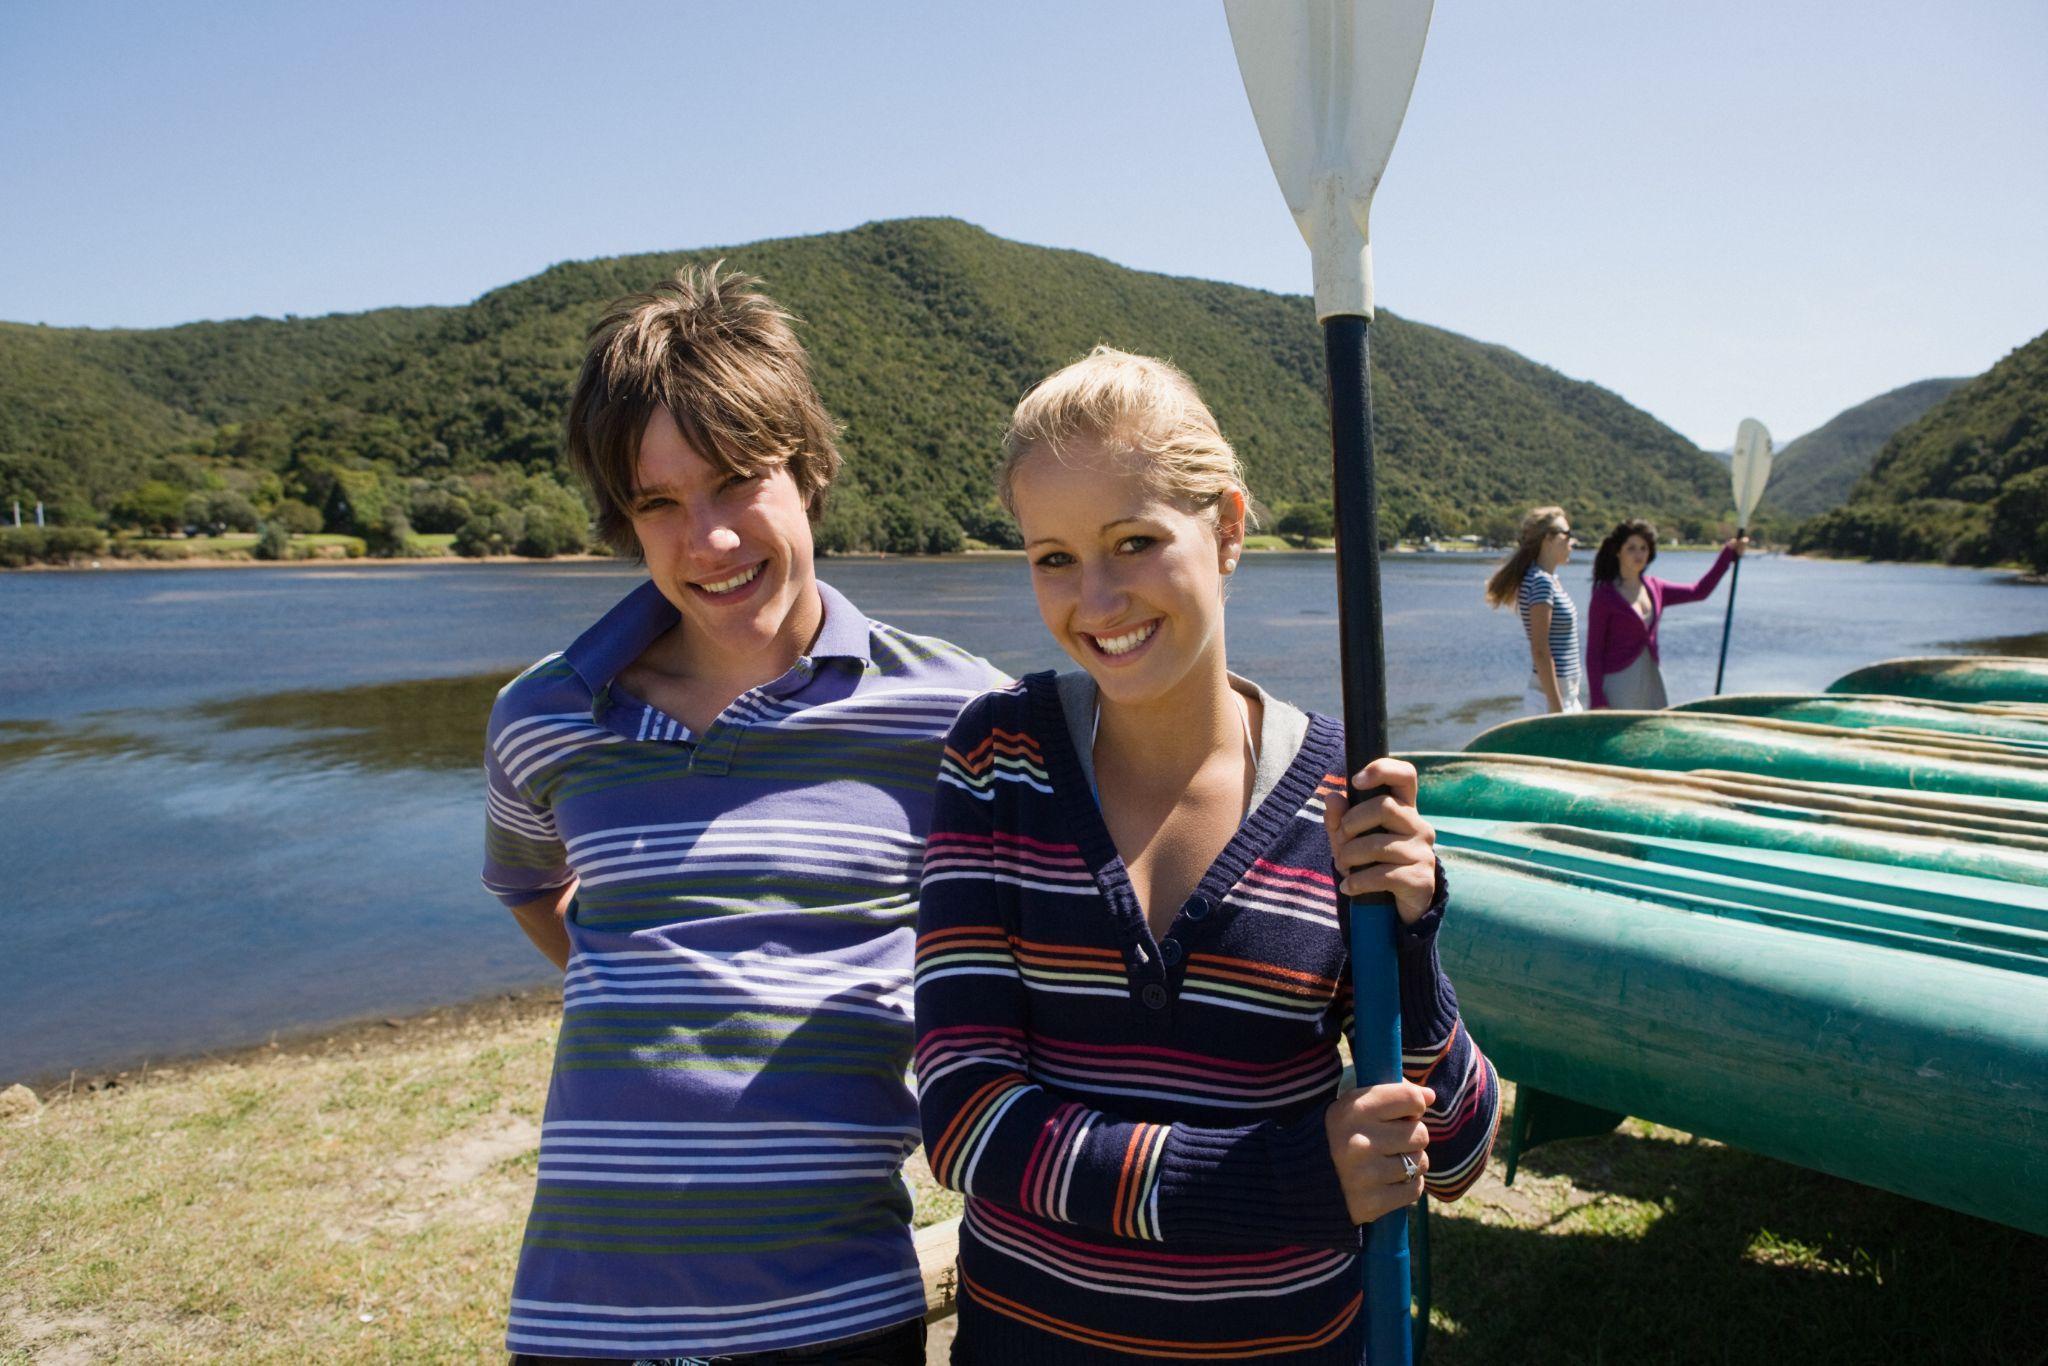 Teenagers prepared to rent a canoe holding paddles